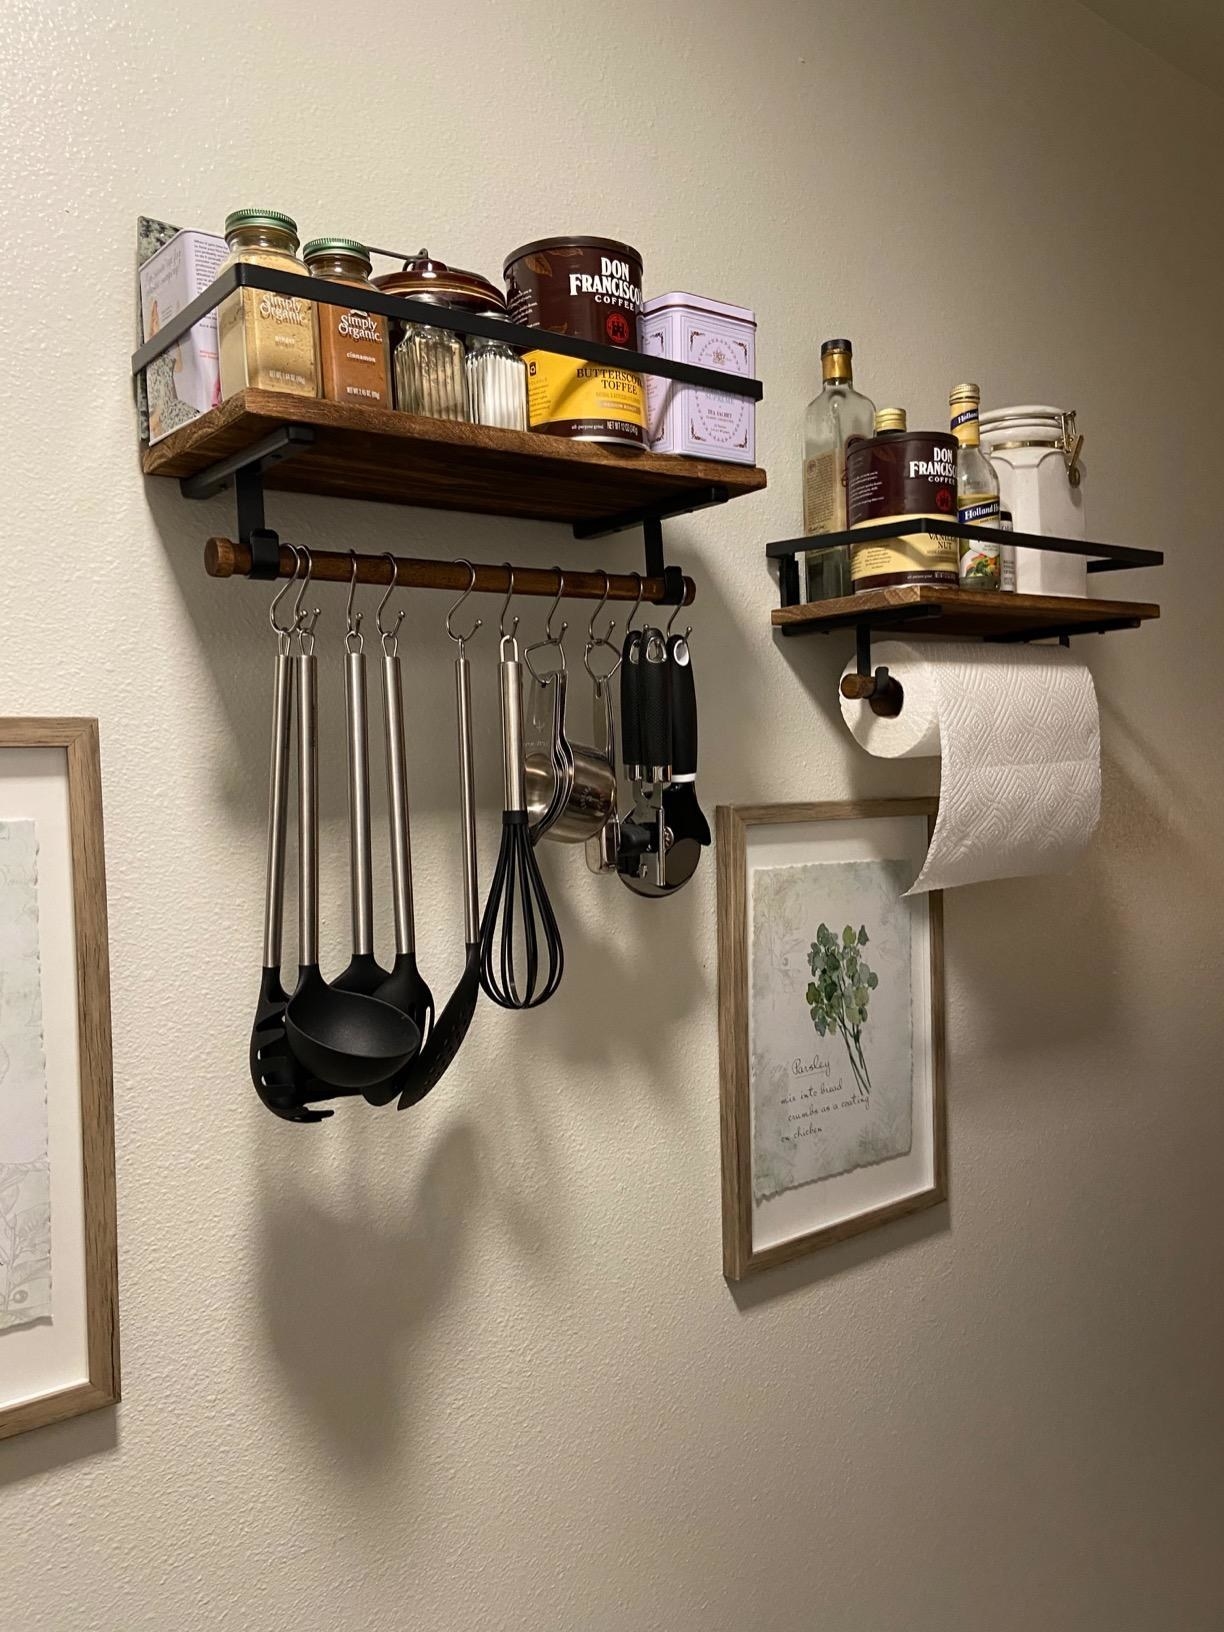 The racks, which have one storage shelf, and a hanging bar that can used as a paper towel rack, or can hold extra items using removable hooks